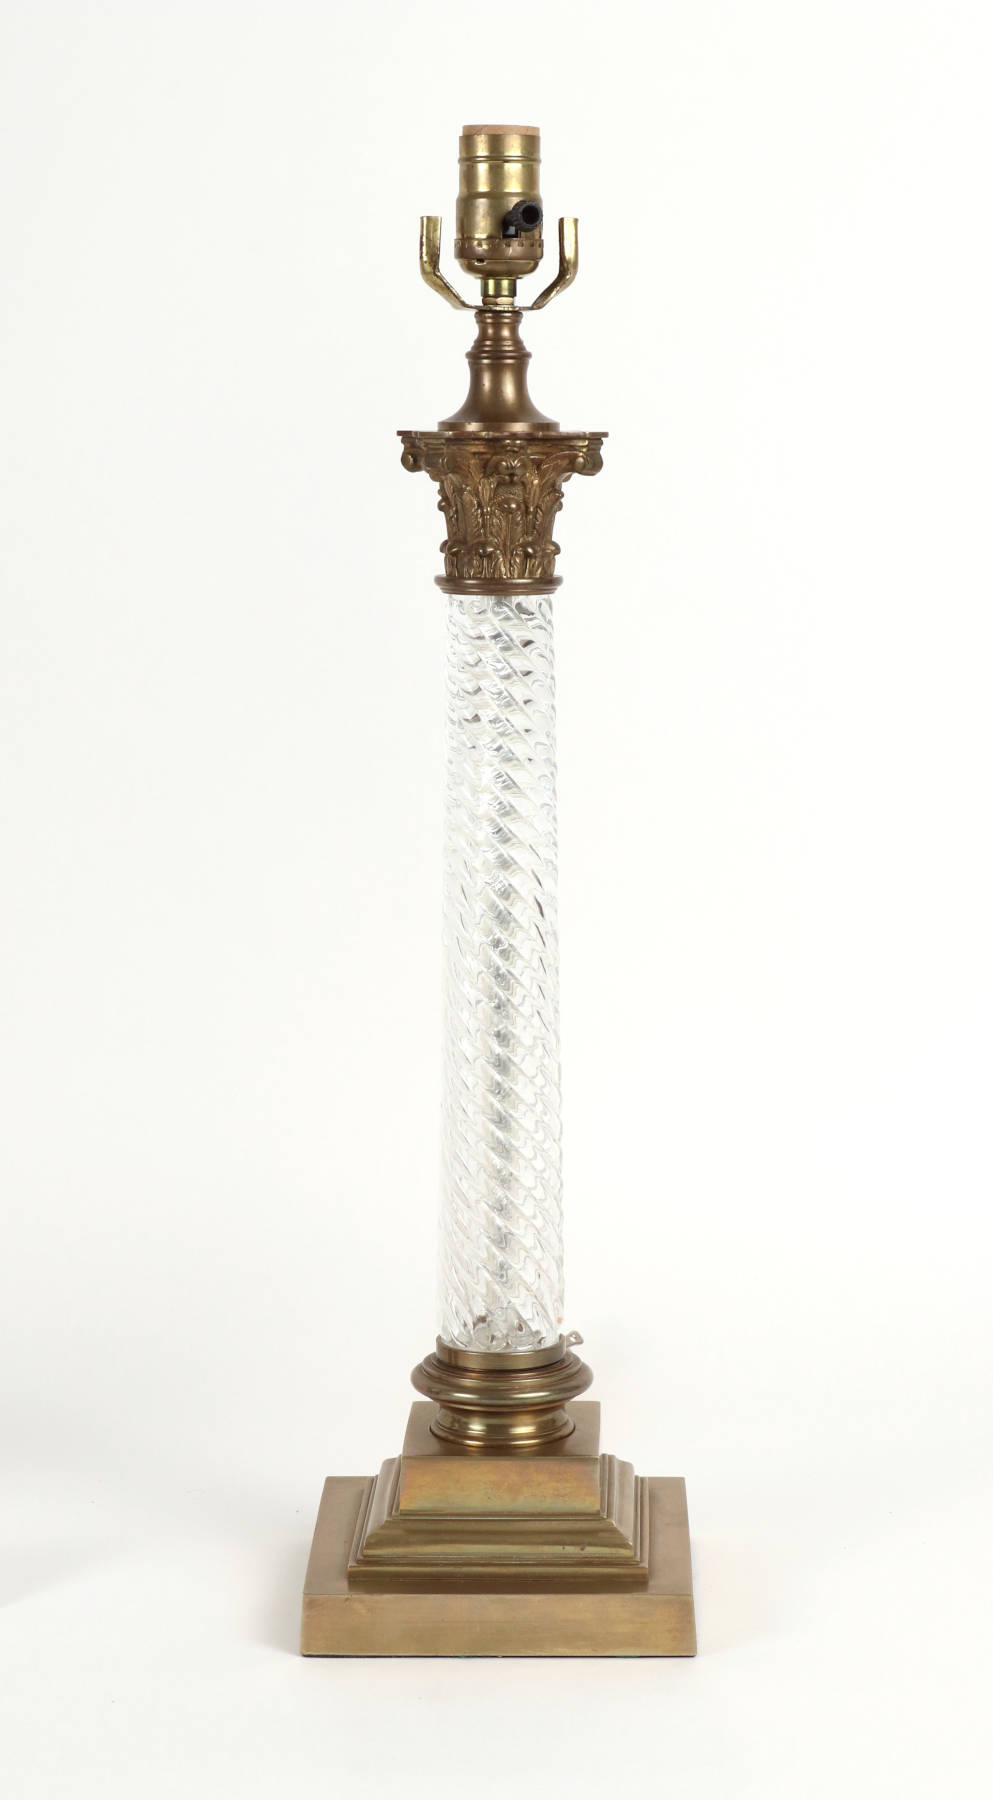 Pair of Crystal and Brass Column Lamps by Vaughan